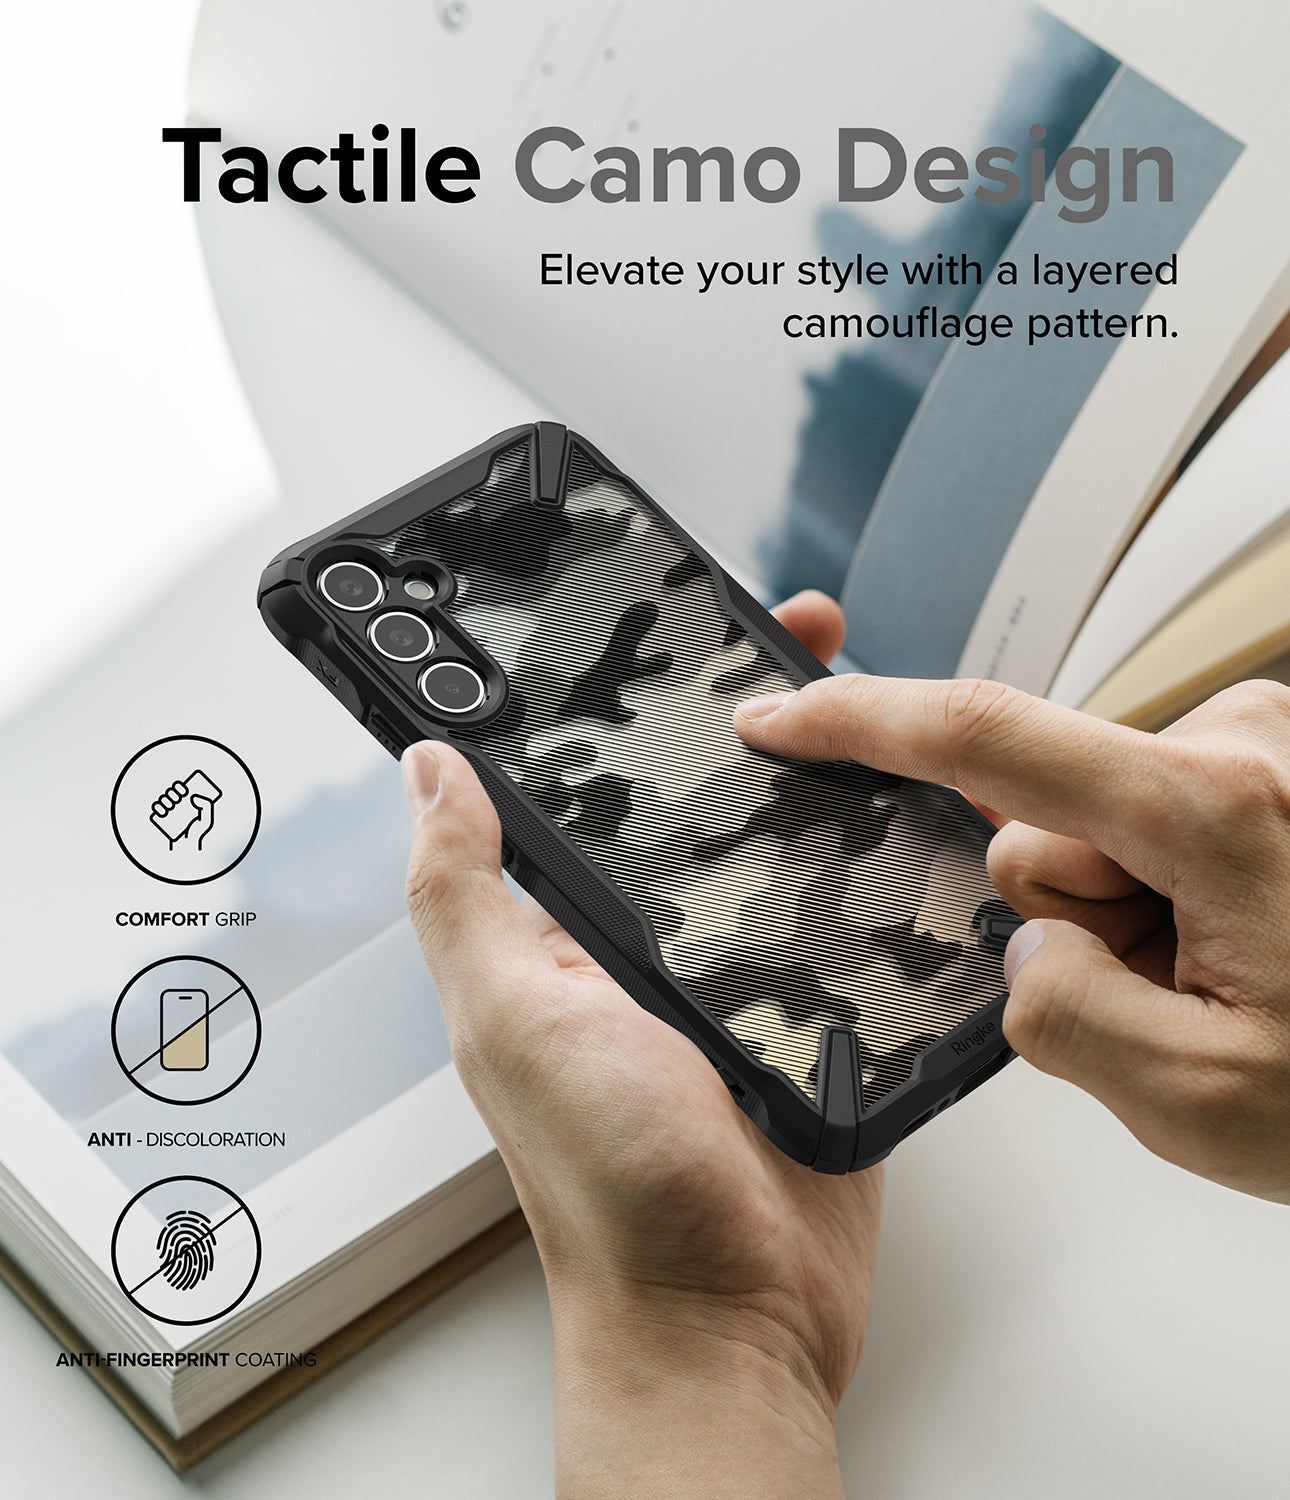 Tactile Camo Design l Elevate your style with a layered camouflage pattern.